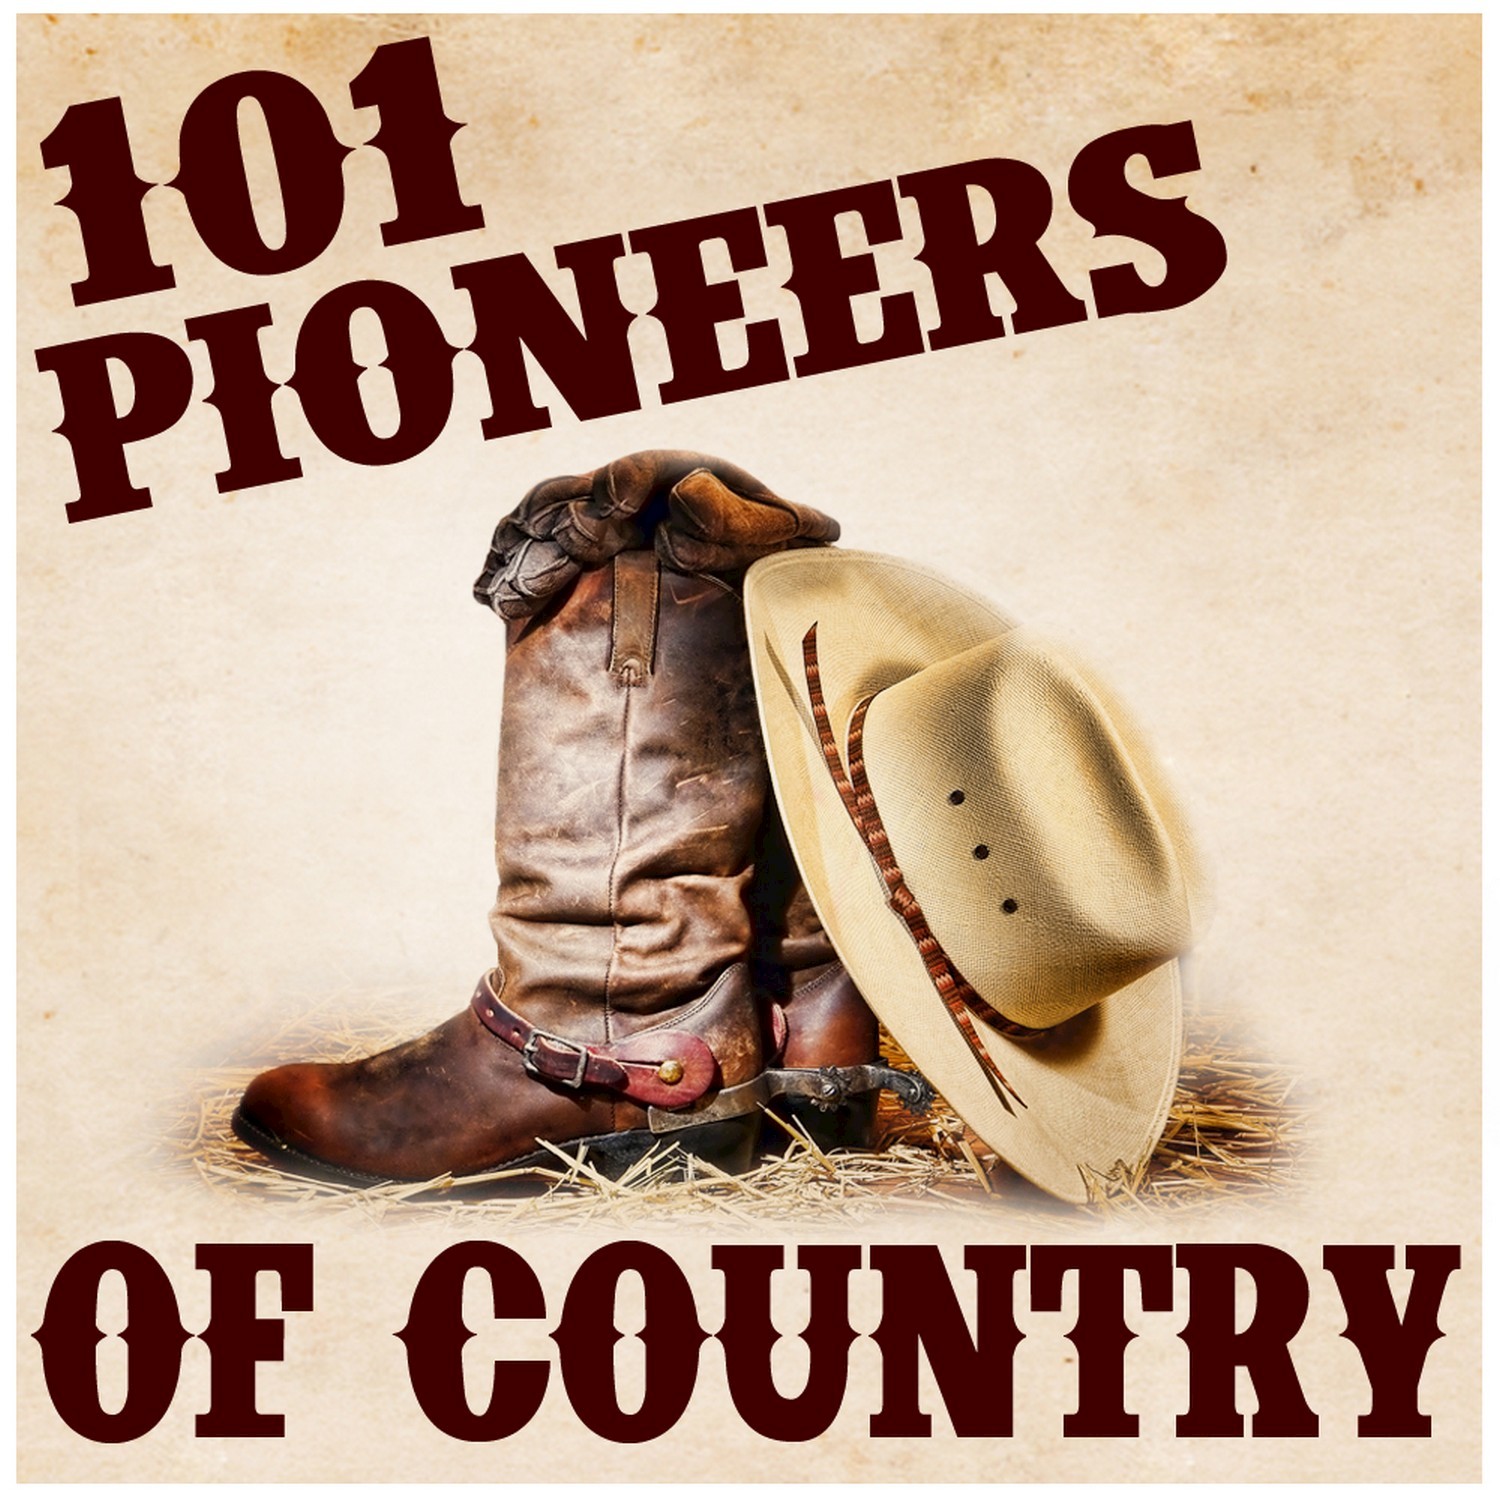 101 Pioneers of Country